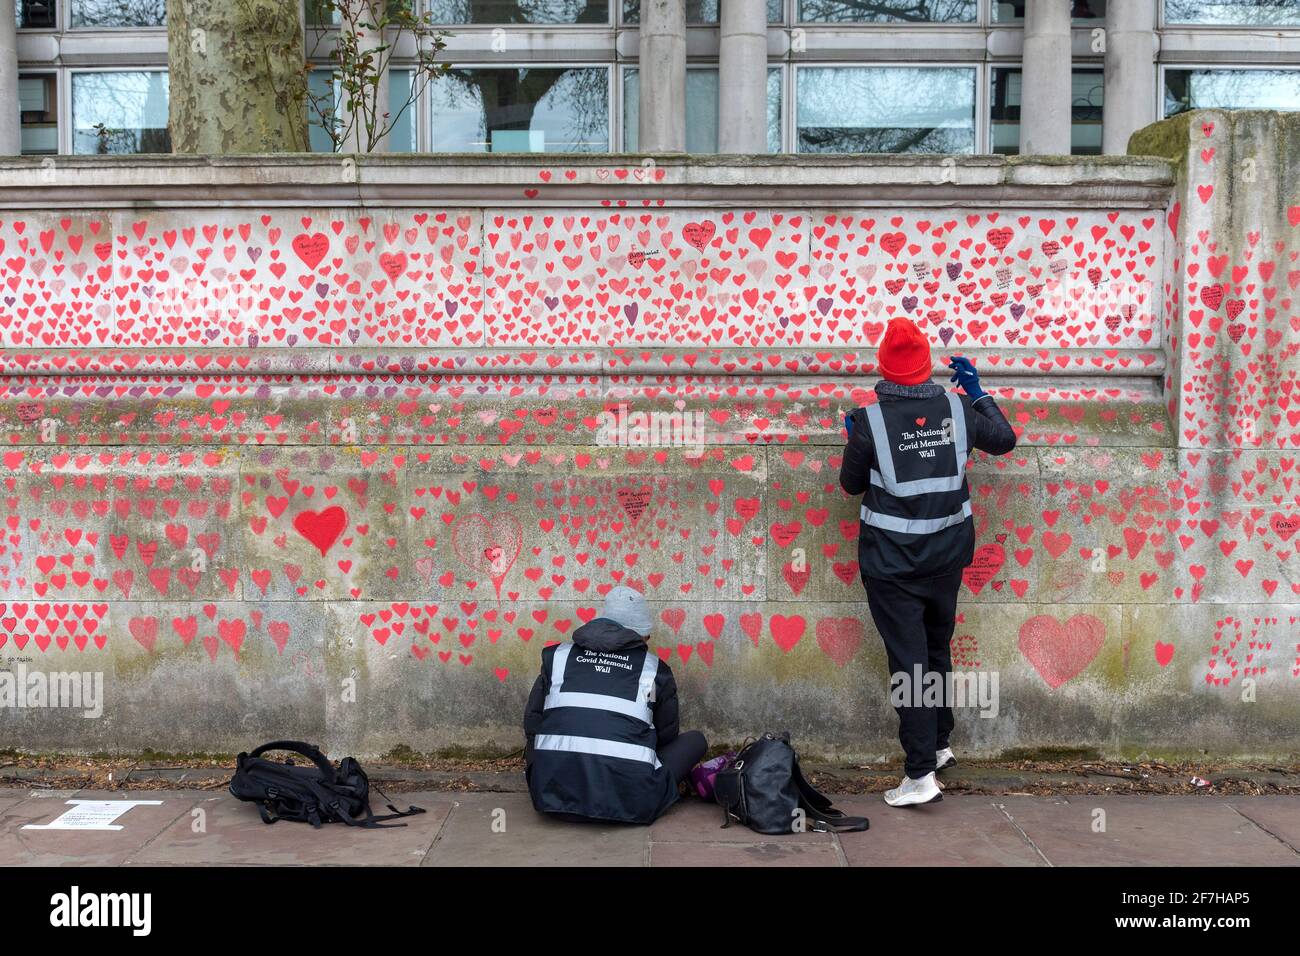 Volunteers paints red hearts on the National Covid Memorial Wall.The wall is adjacent to St Thomas' Hospital and is being hand-painted with 150000 hearts to honour UK Covid-19 victims, it stretches over 700 metres long. Stock Photo